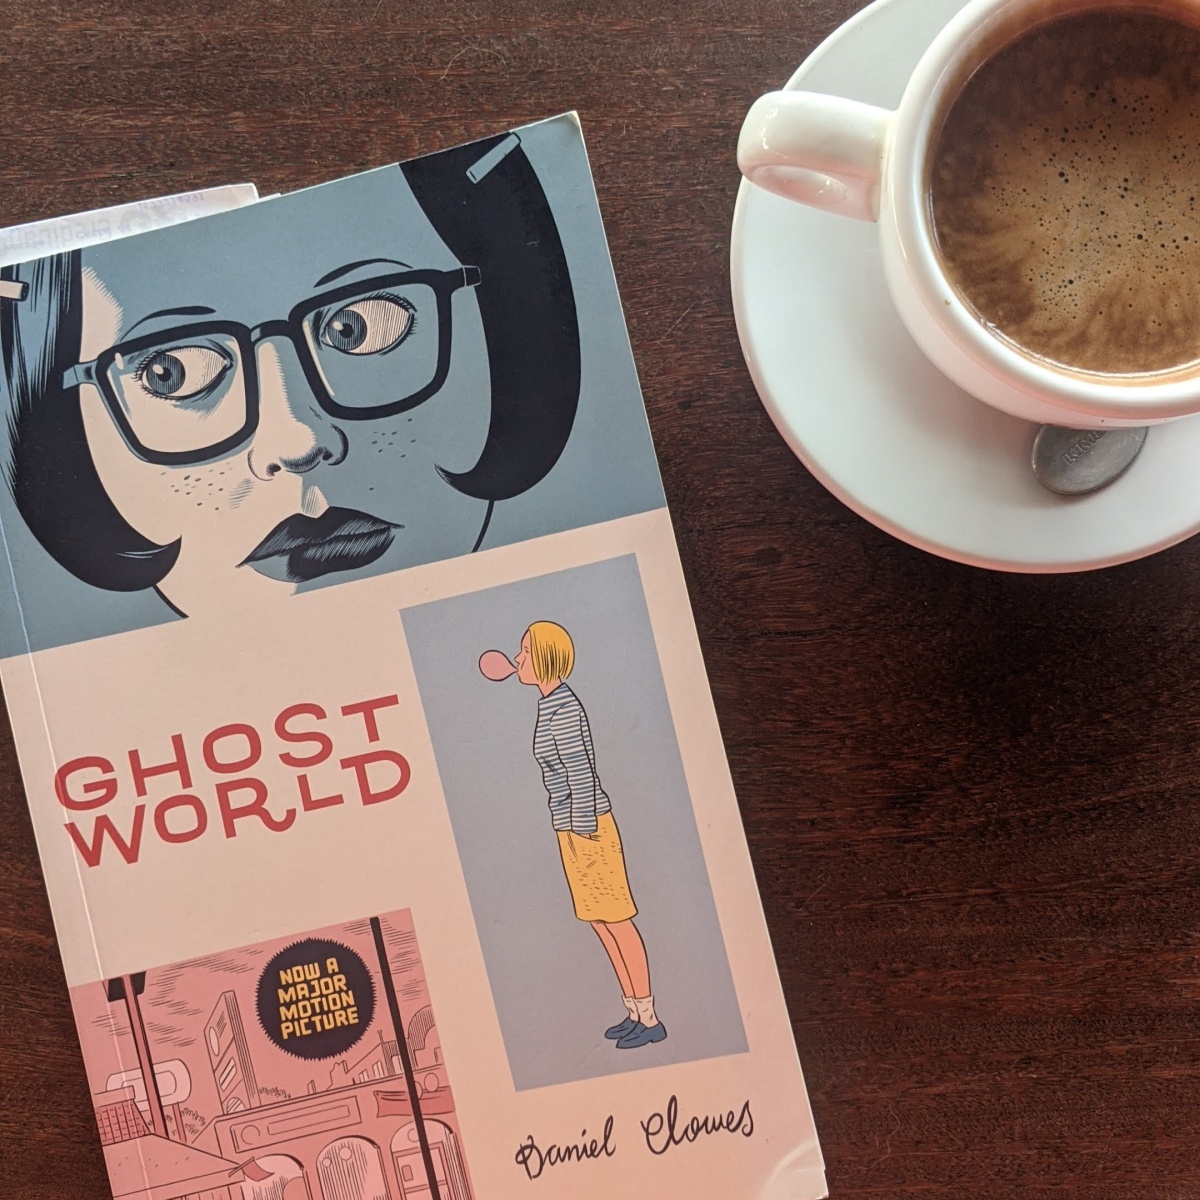 Five Things About Ghost World by Daniel Clowes